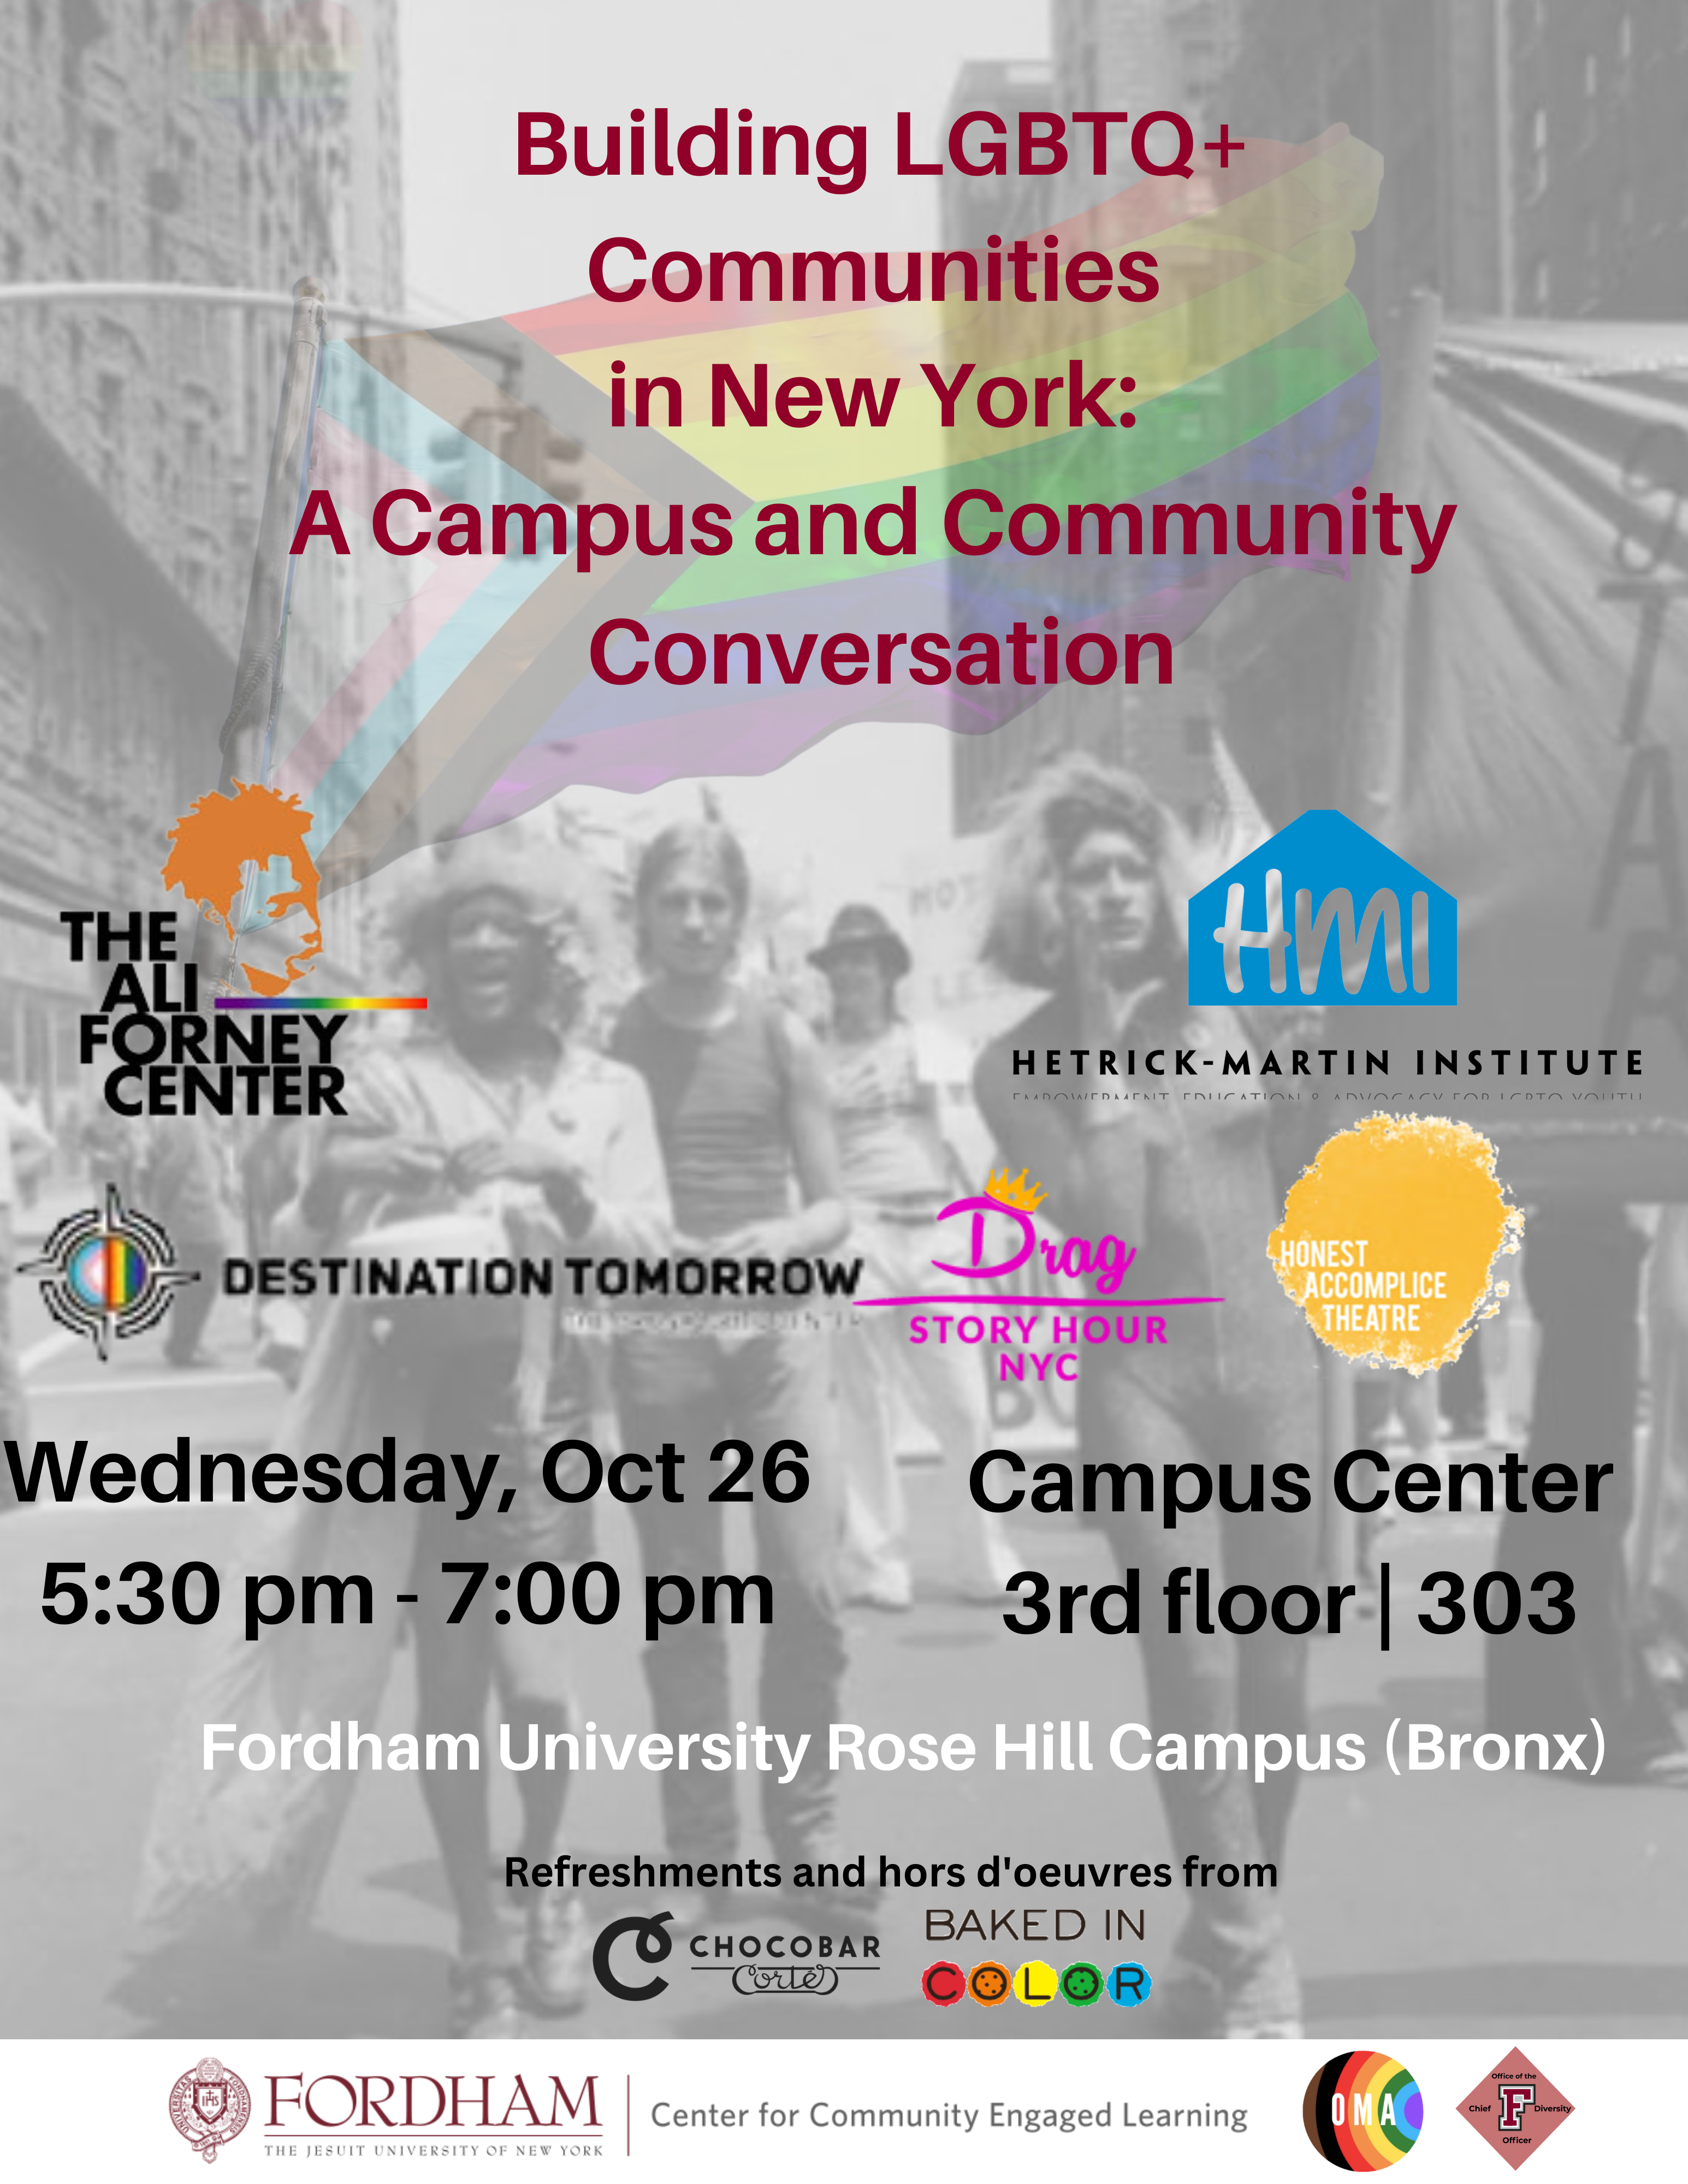 Building LGBTQ+ Communities in New York: A Campus and Community Conversation